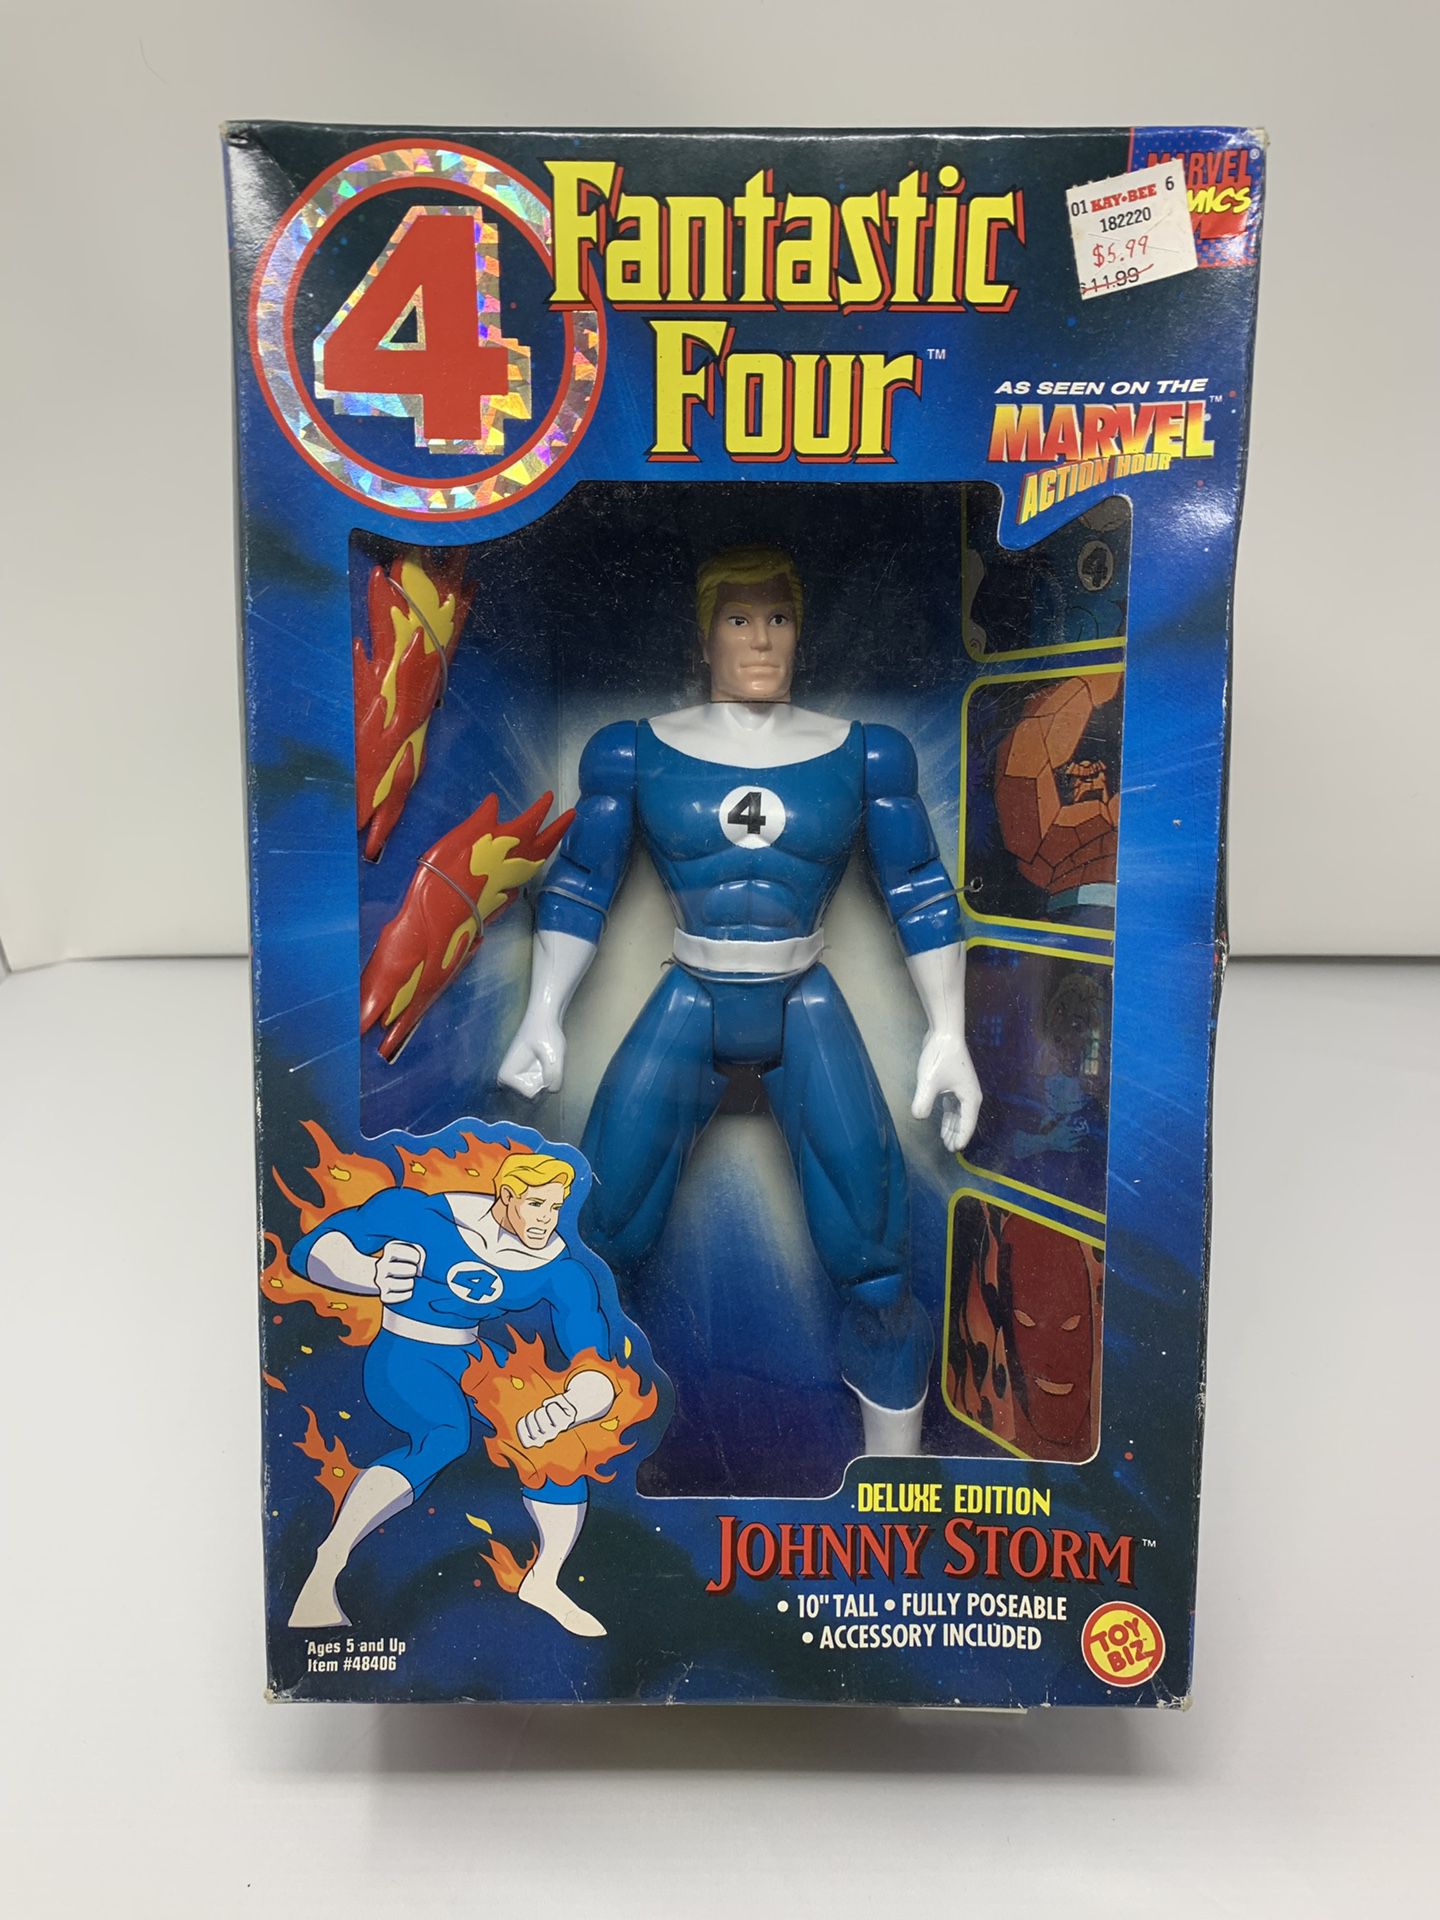 Brand New The Fantastic Four’s Johnny Storm aka The Human Torch 10” Marvel Action Figure